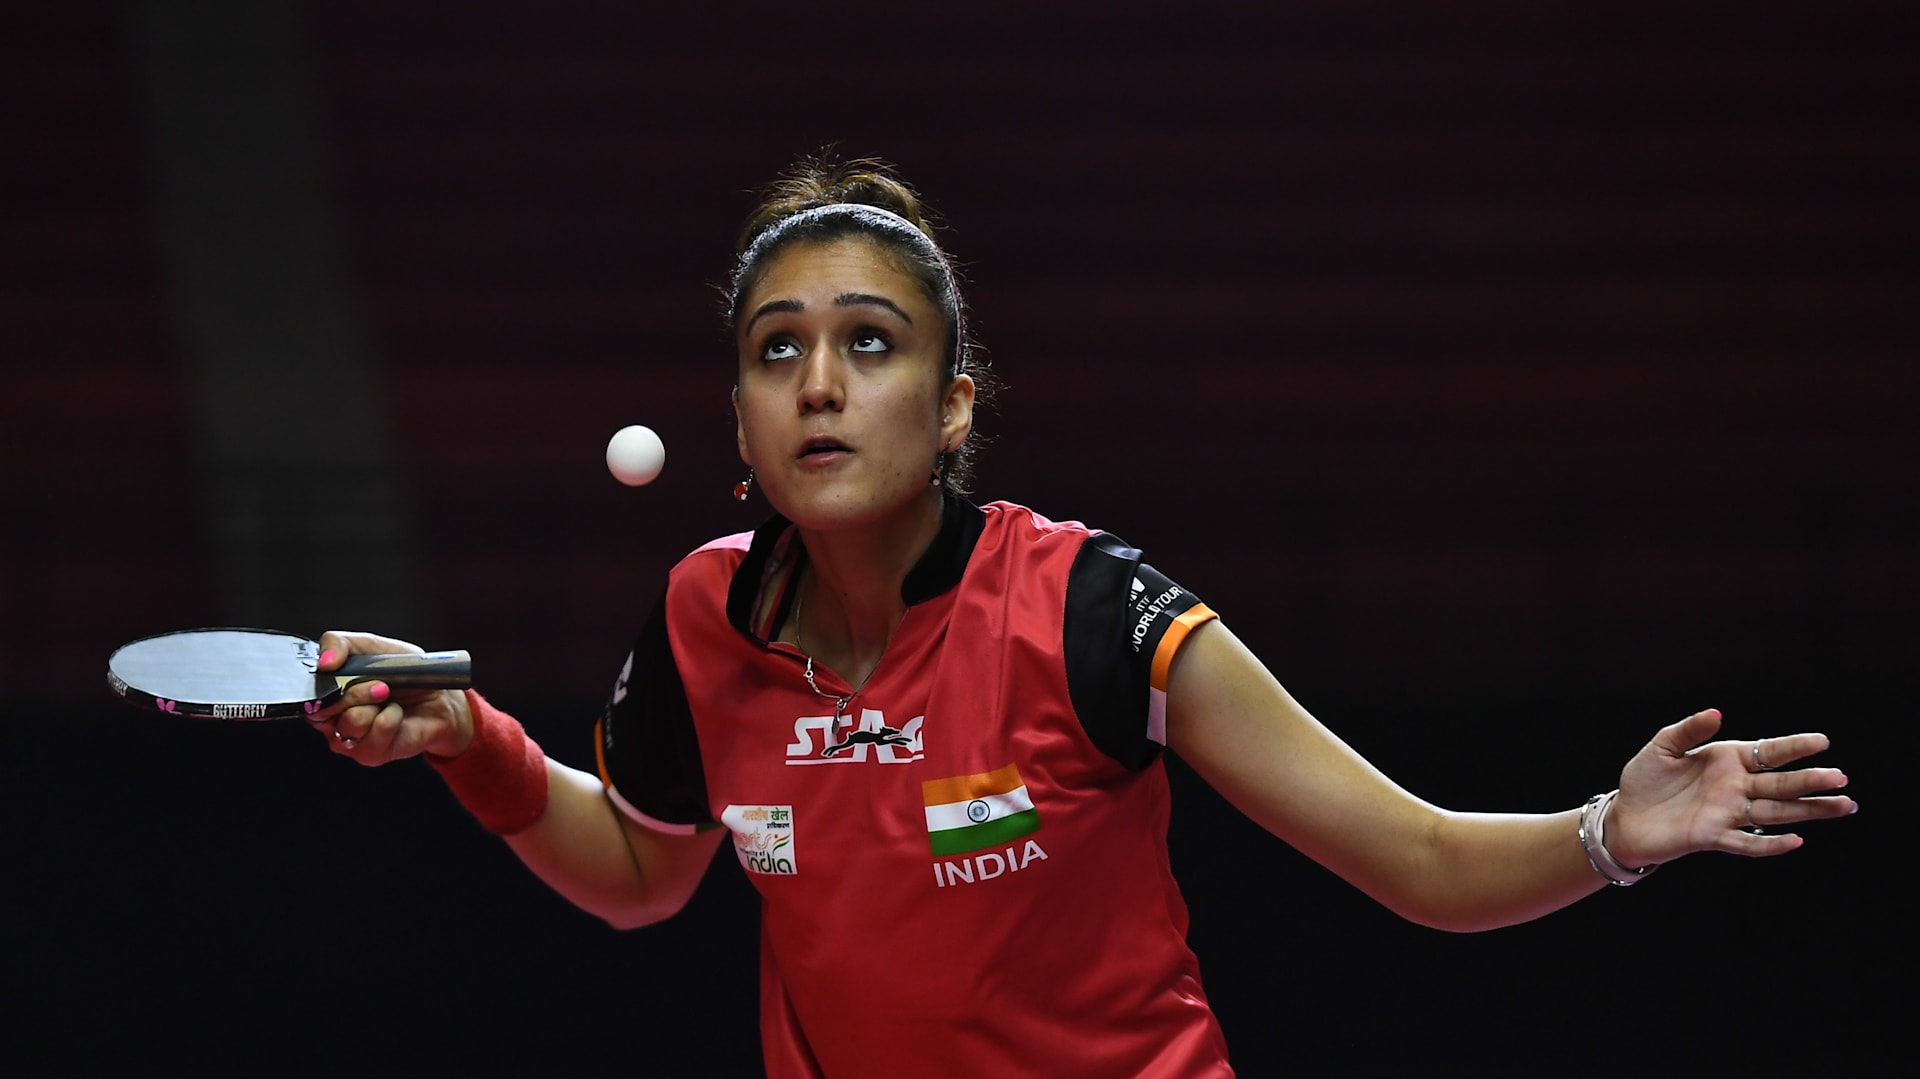 Commonwealth Games 2022 table tennis Indian womens team out after 3-2 loss vs Malaysia